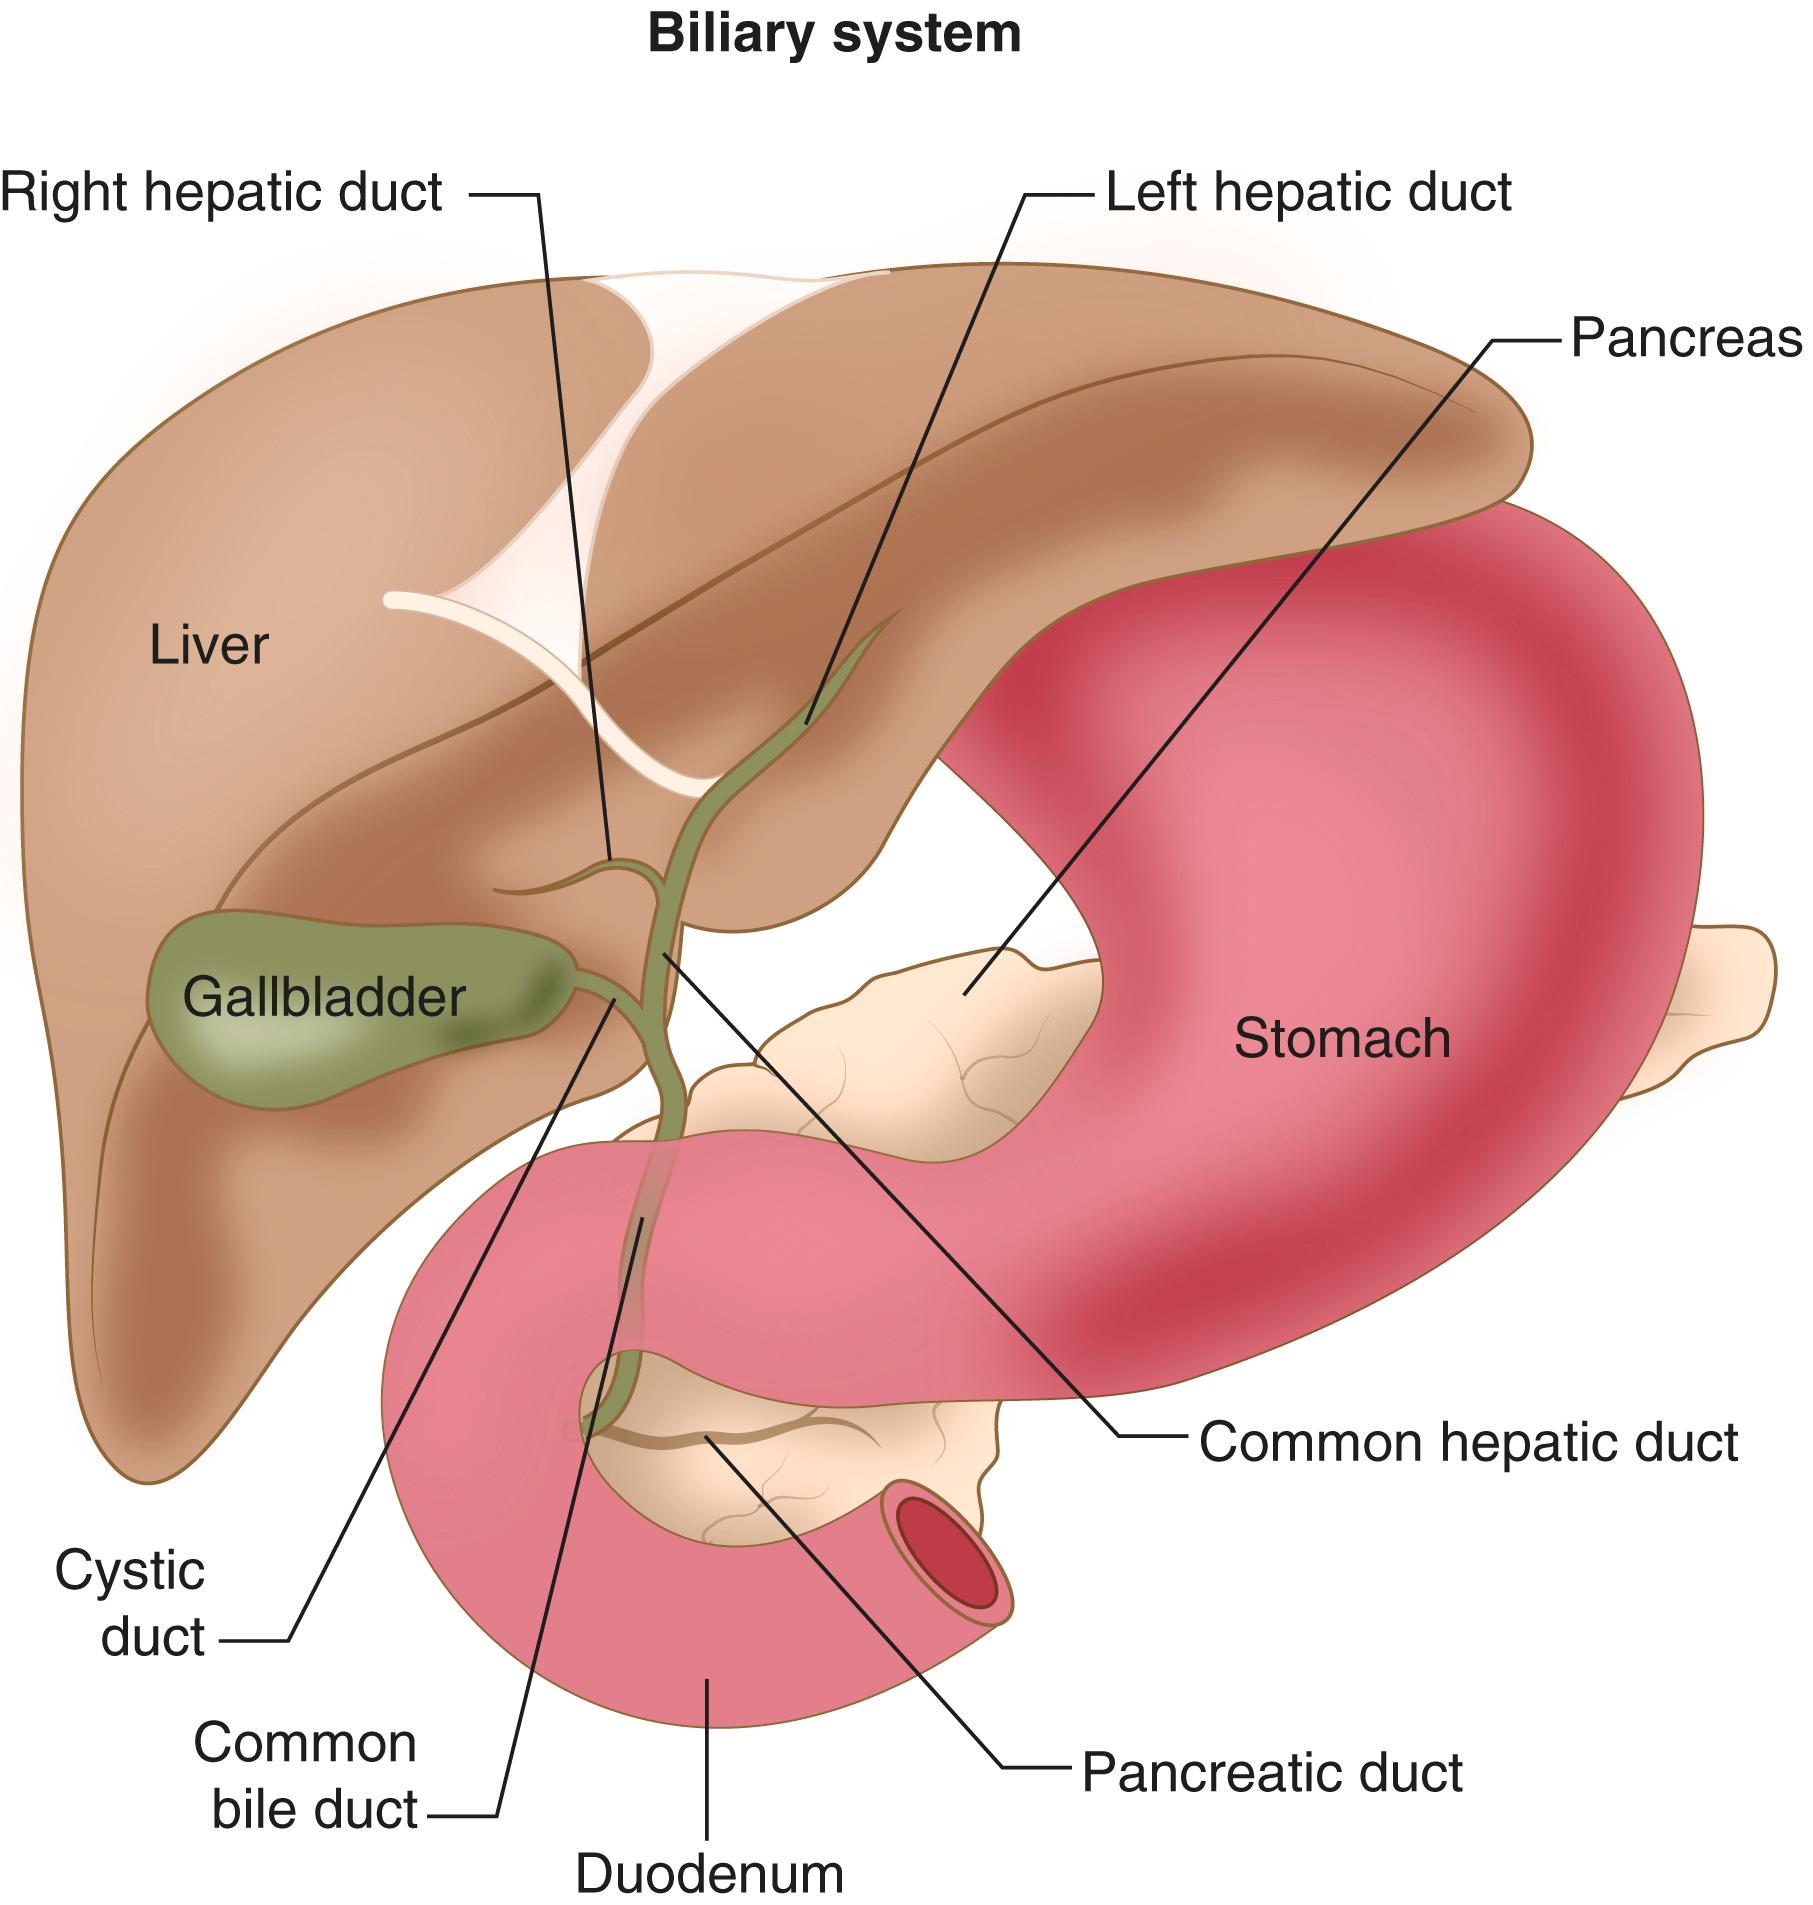 FIGURE 181-1, Anatomy of the liver and biliary tract.